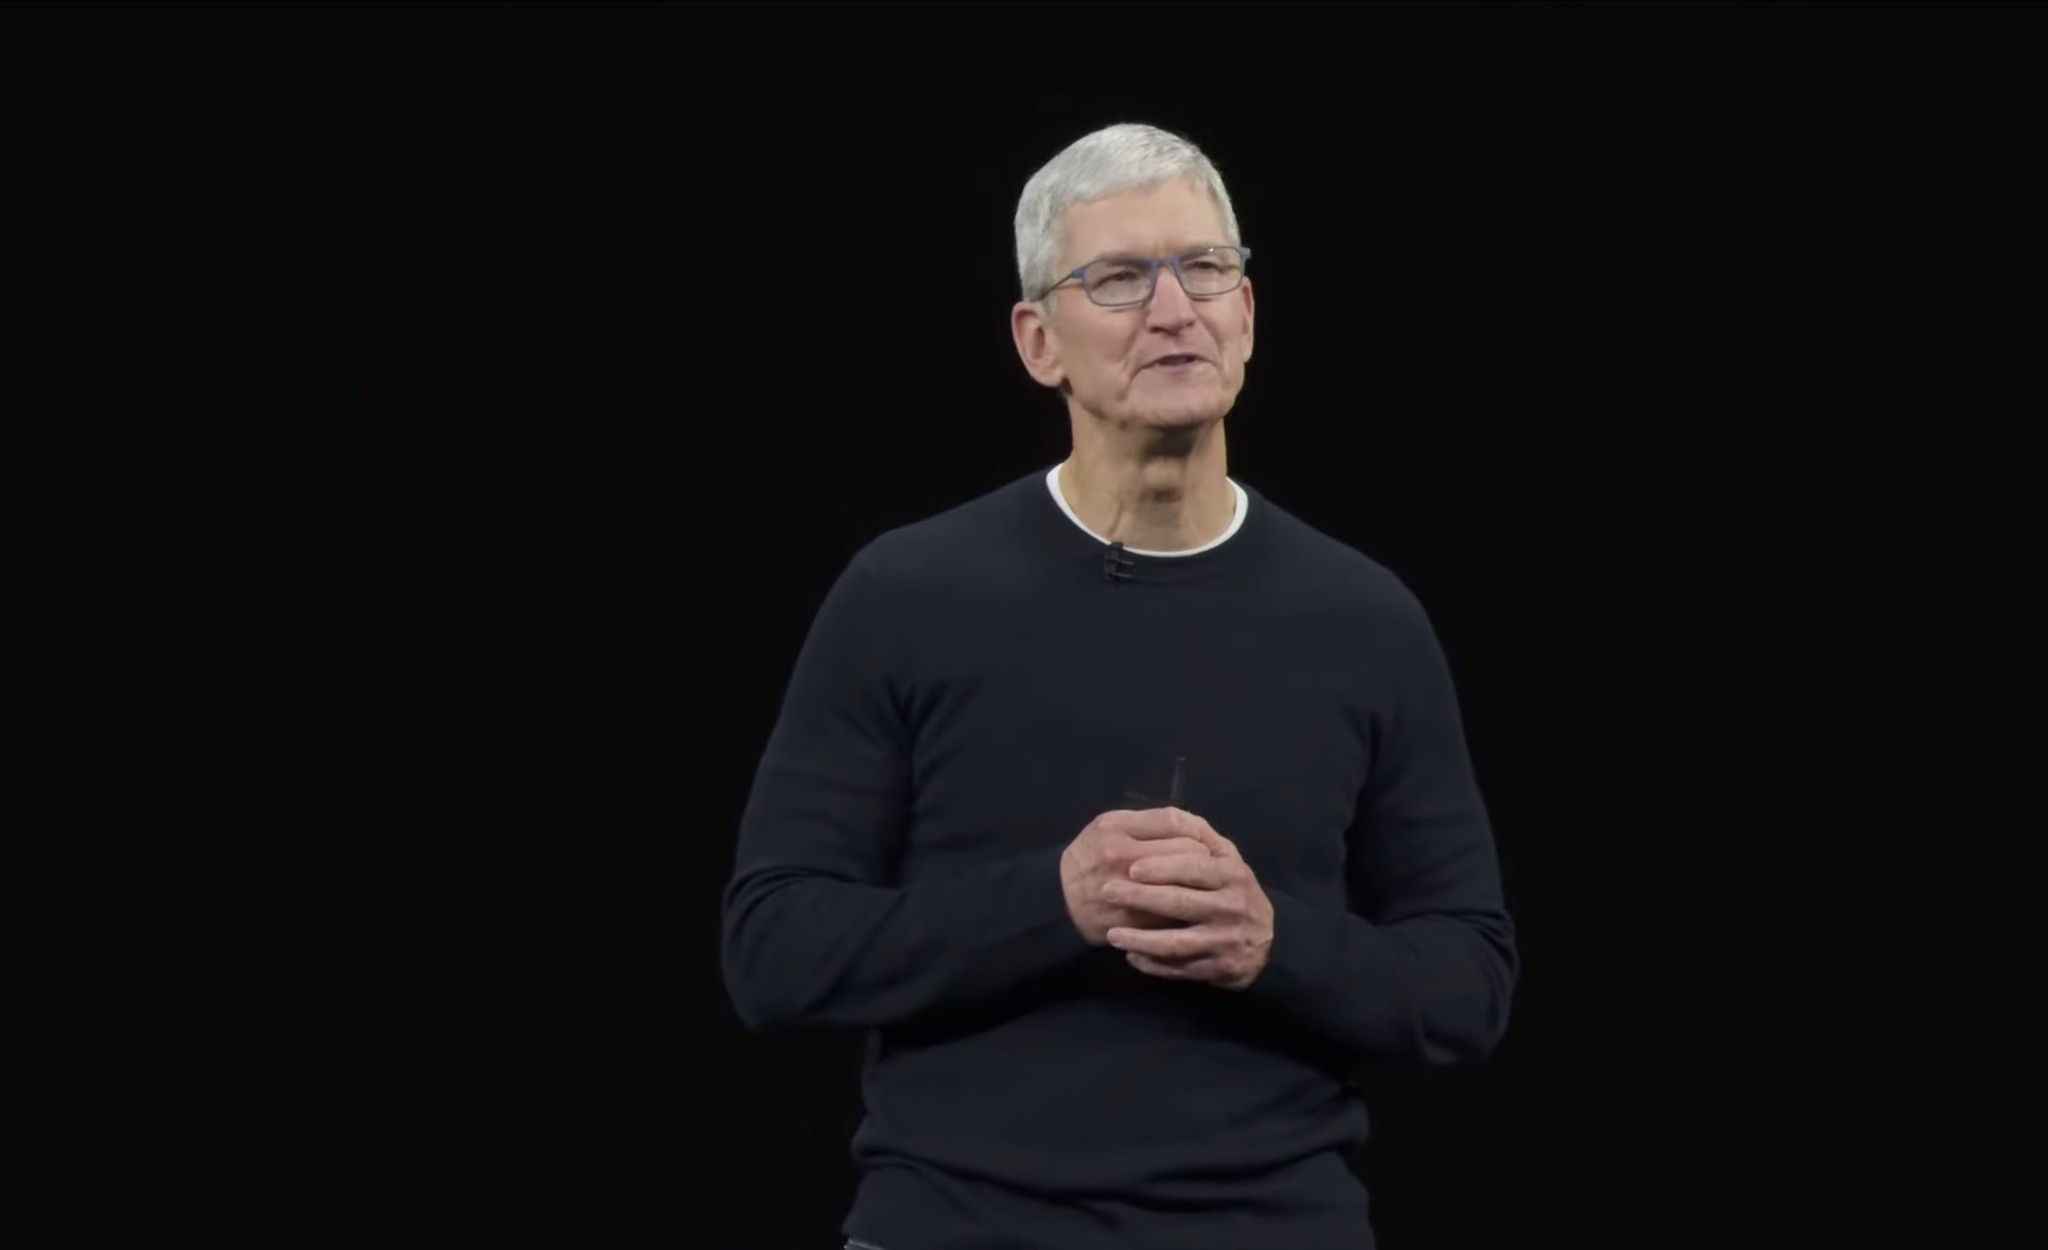 Tim Cook at the iPhone 11 Pro event